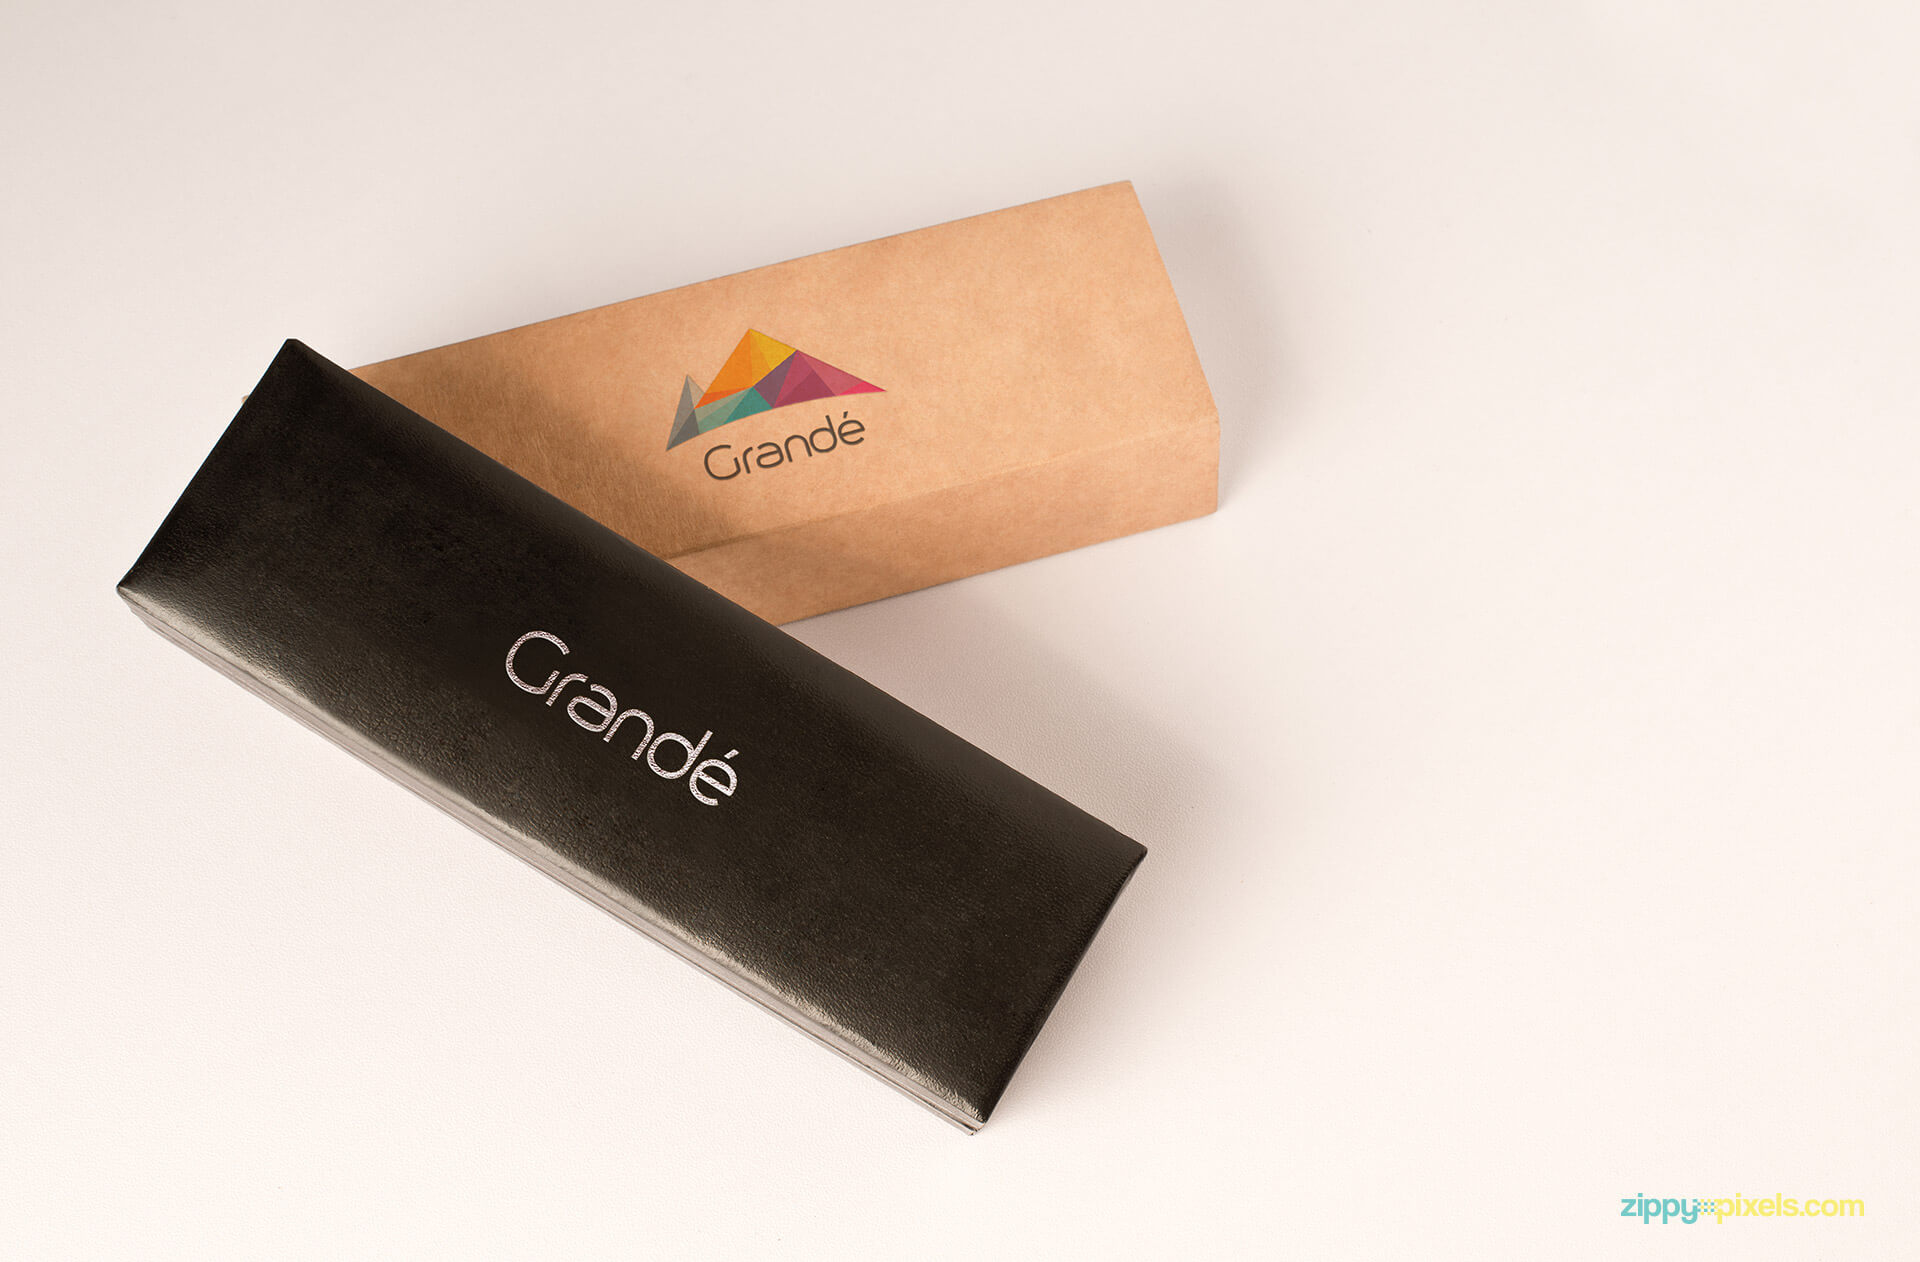 Two Branded Pen Boxes For Corporate identity